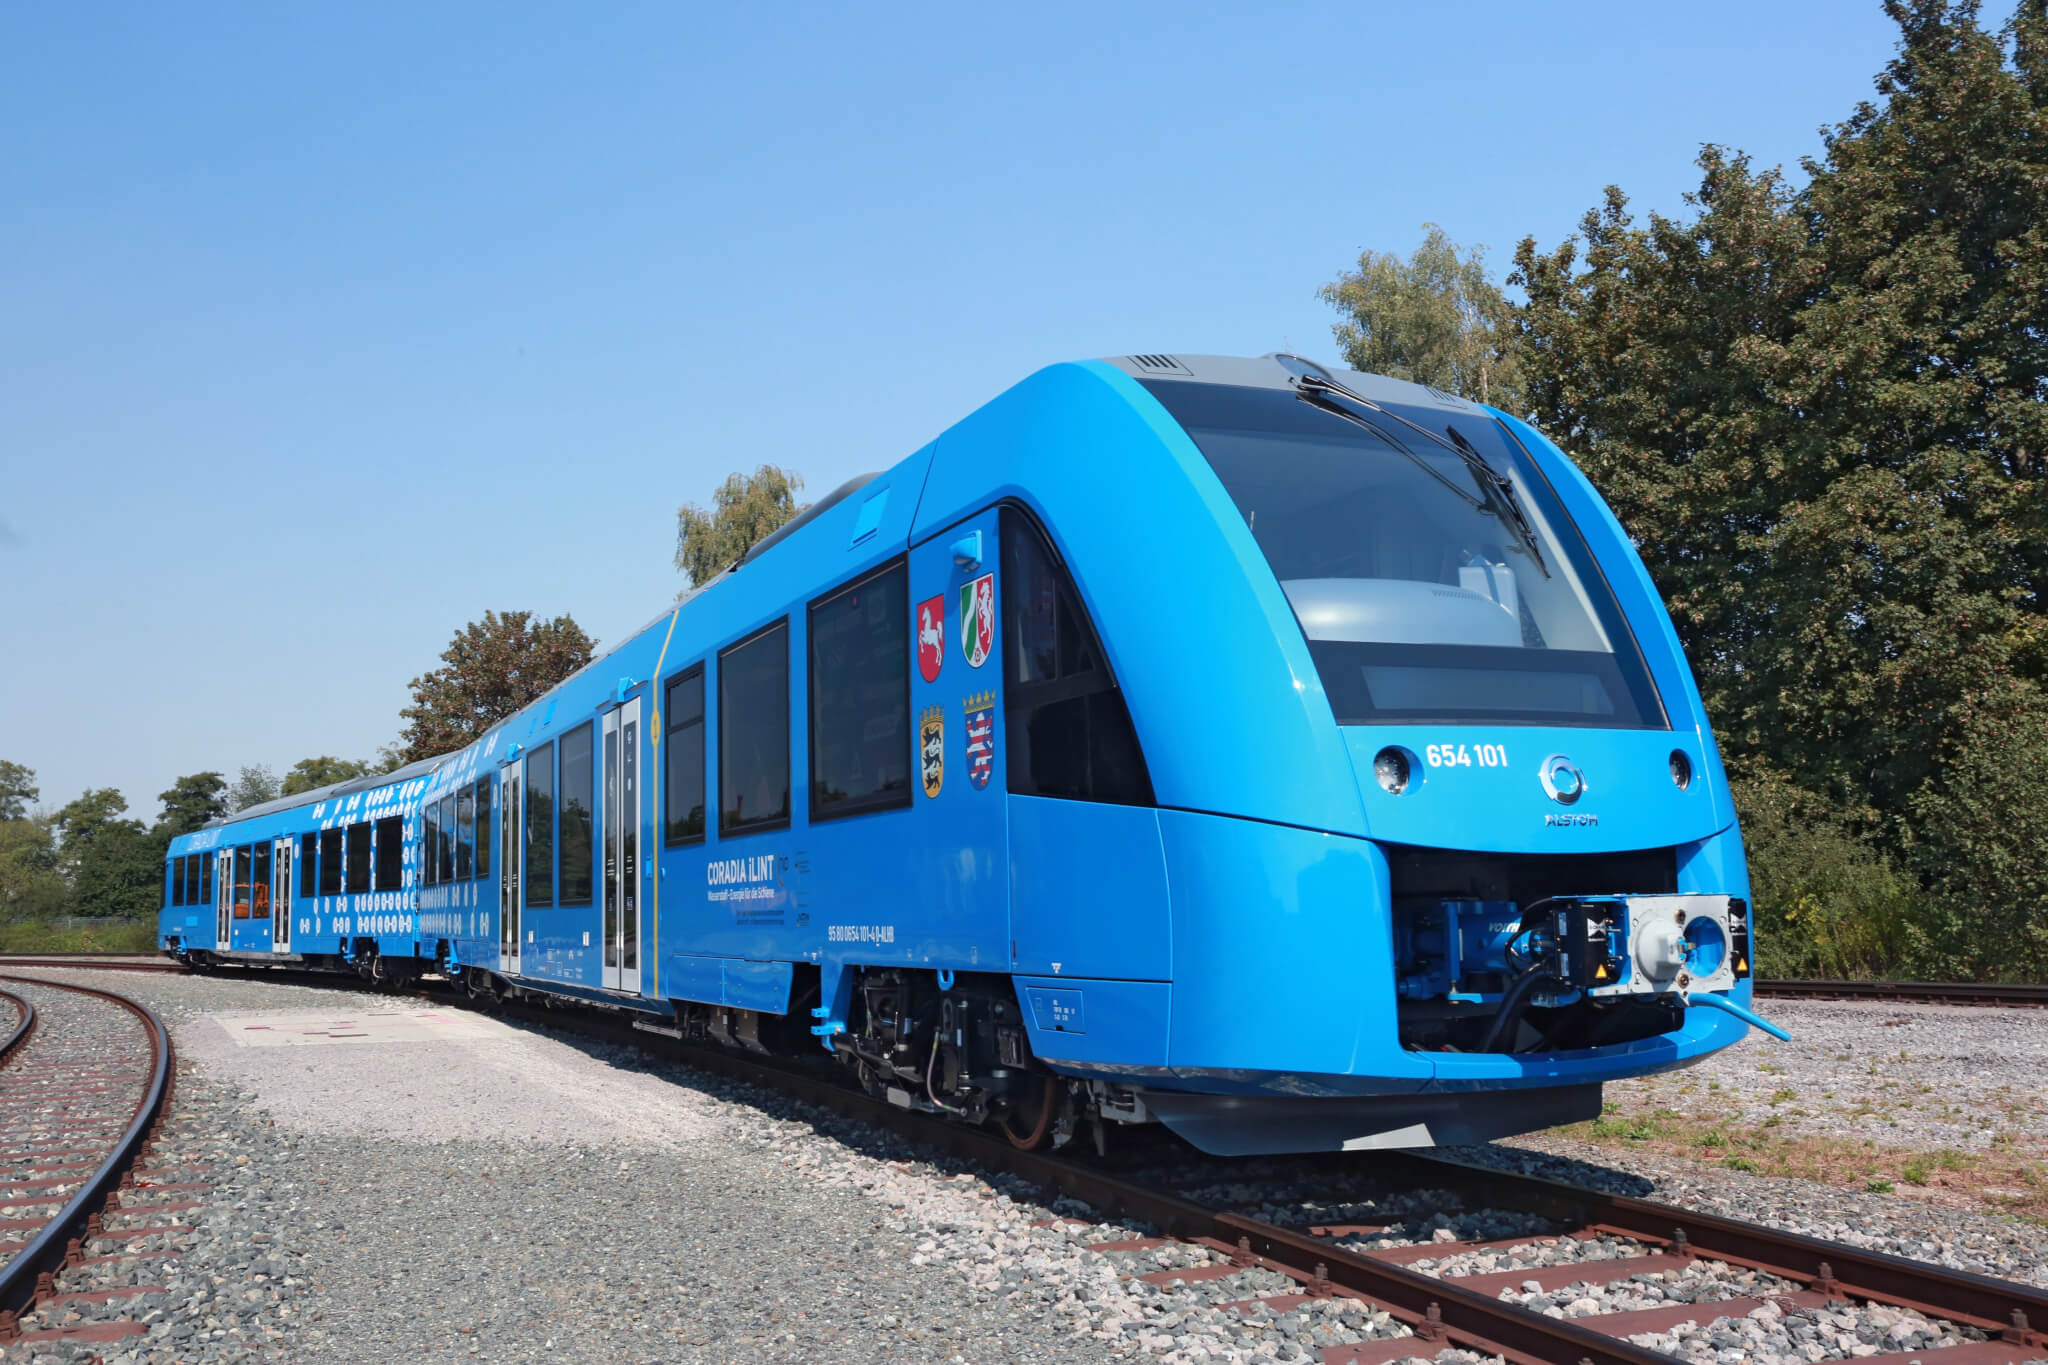 Alstom plans to introduce hydrogen trains to the UK